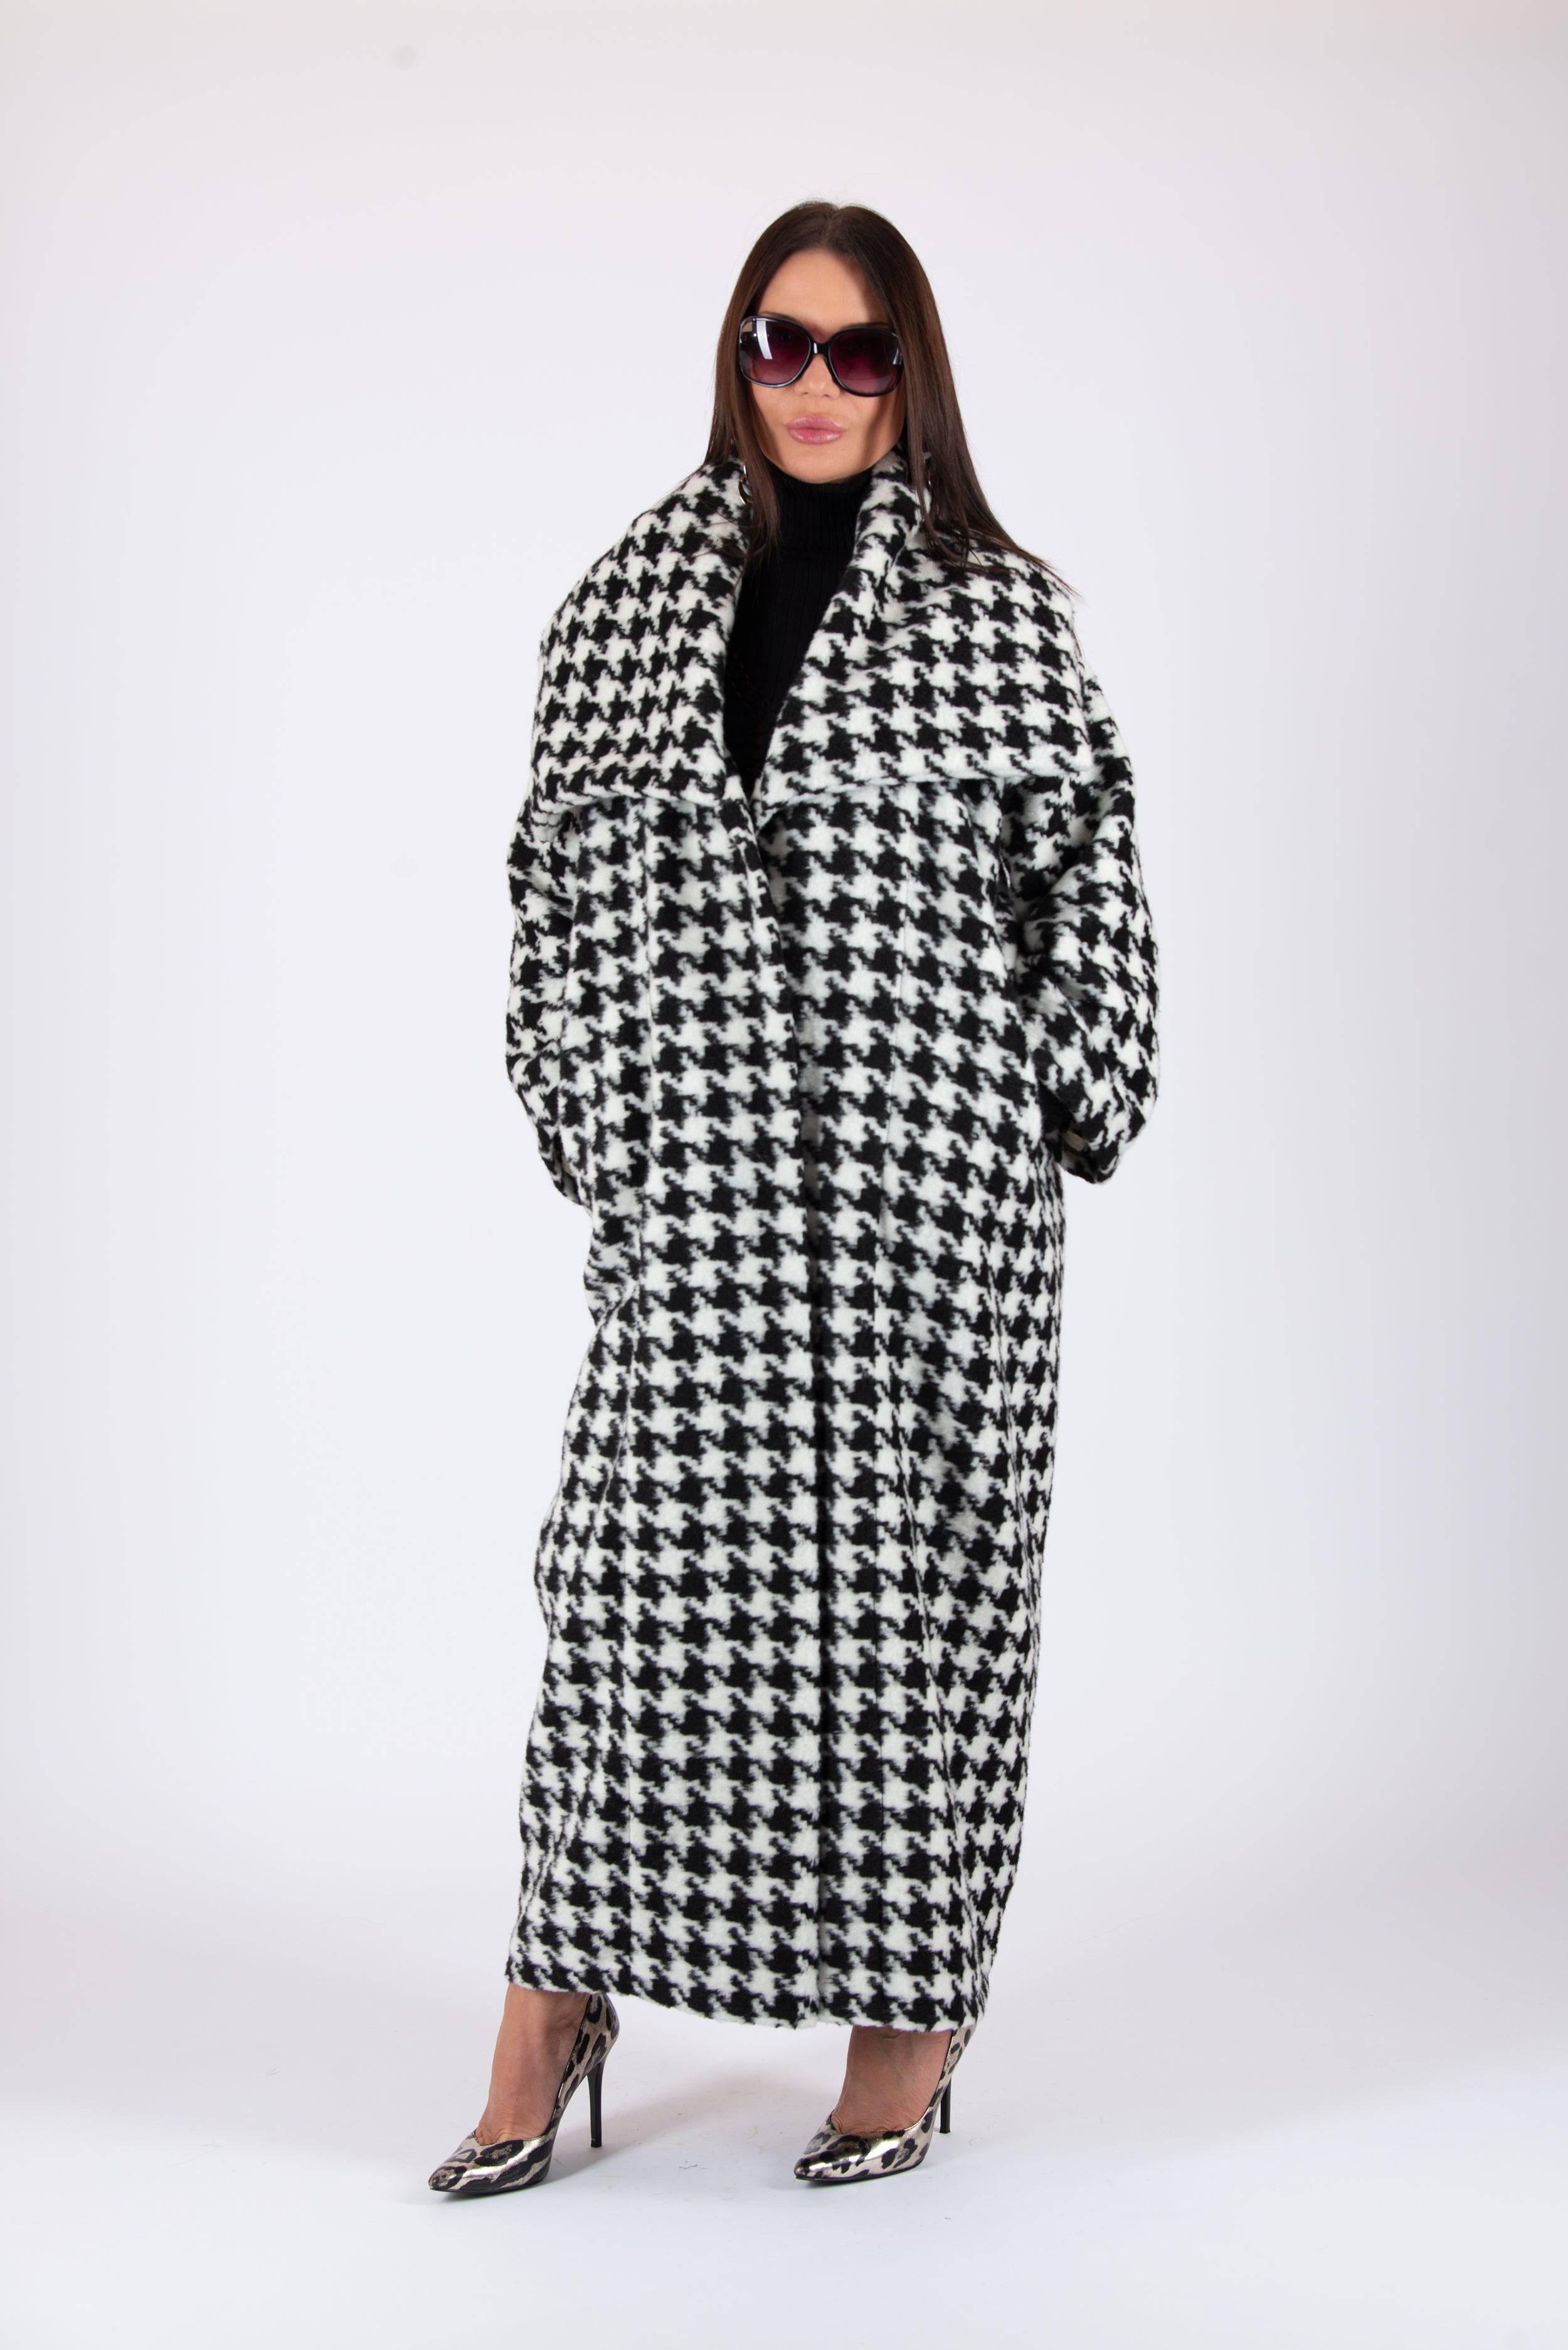 Wool Winter Houndstooth Coat, Winter Cardigan by EUG Fashion